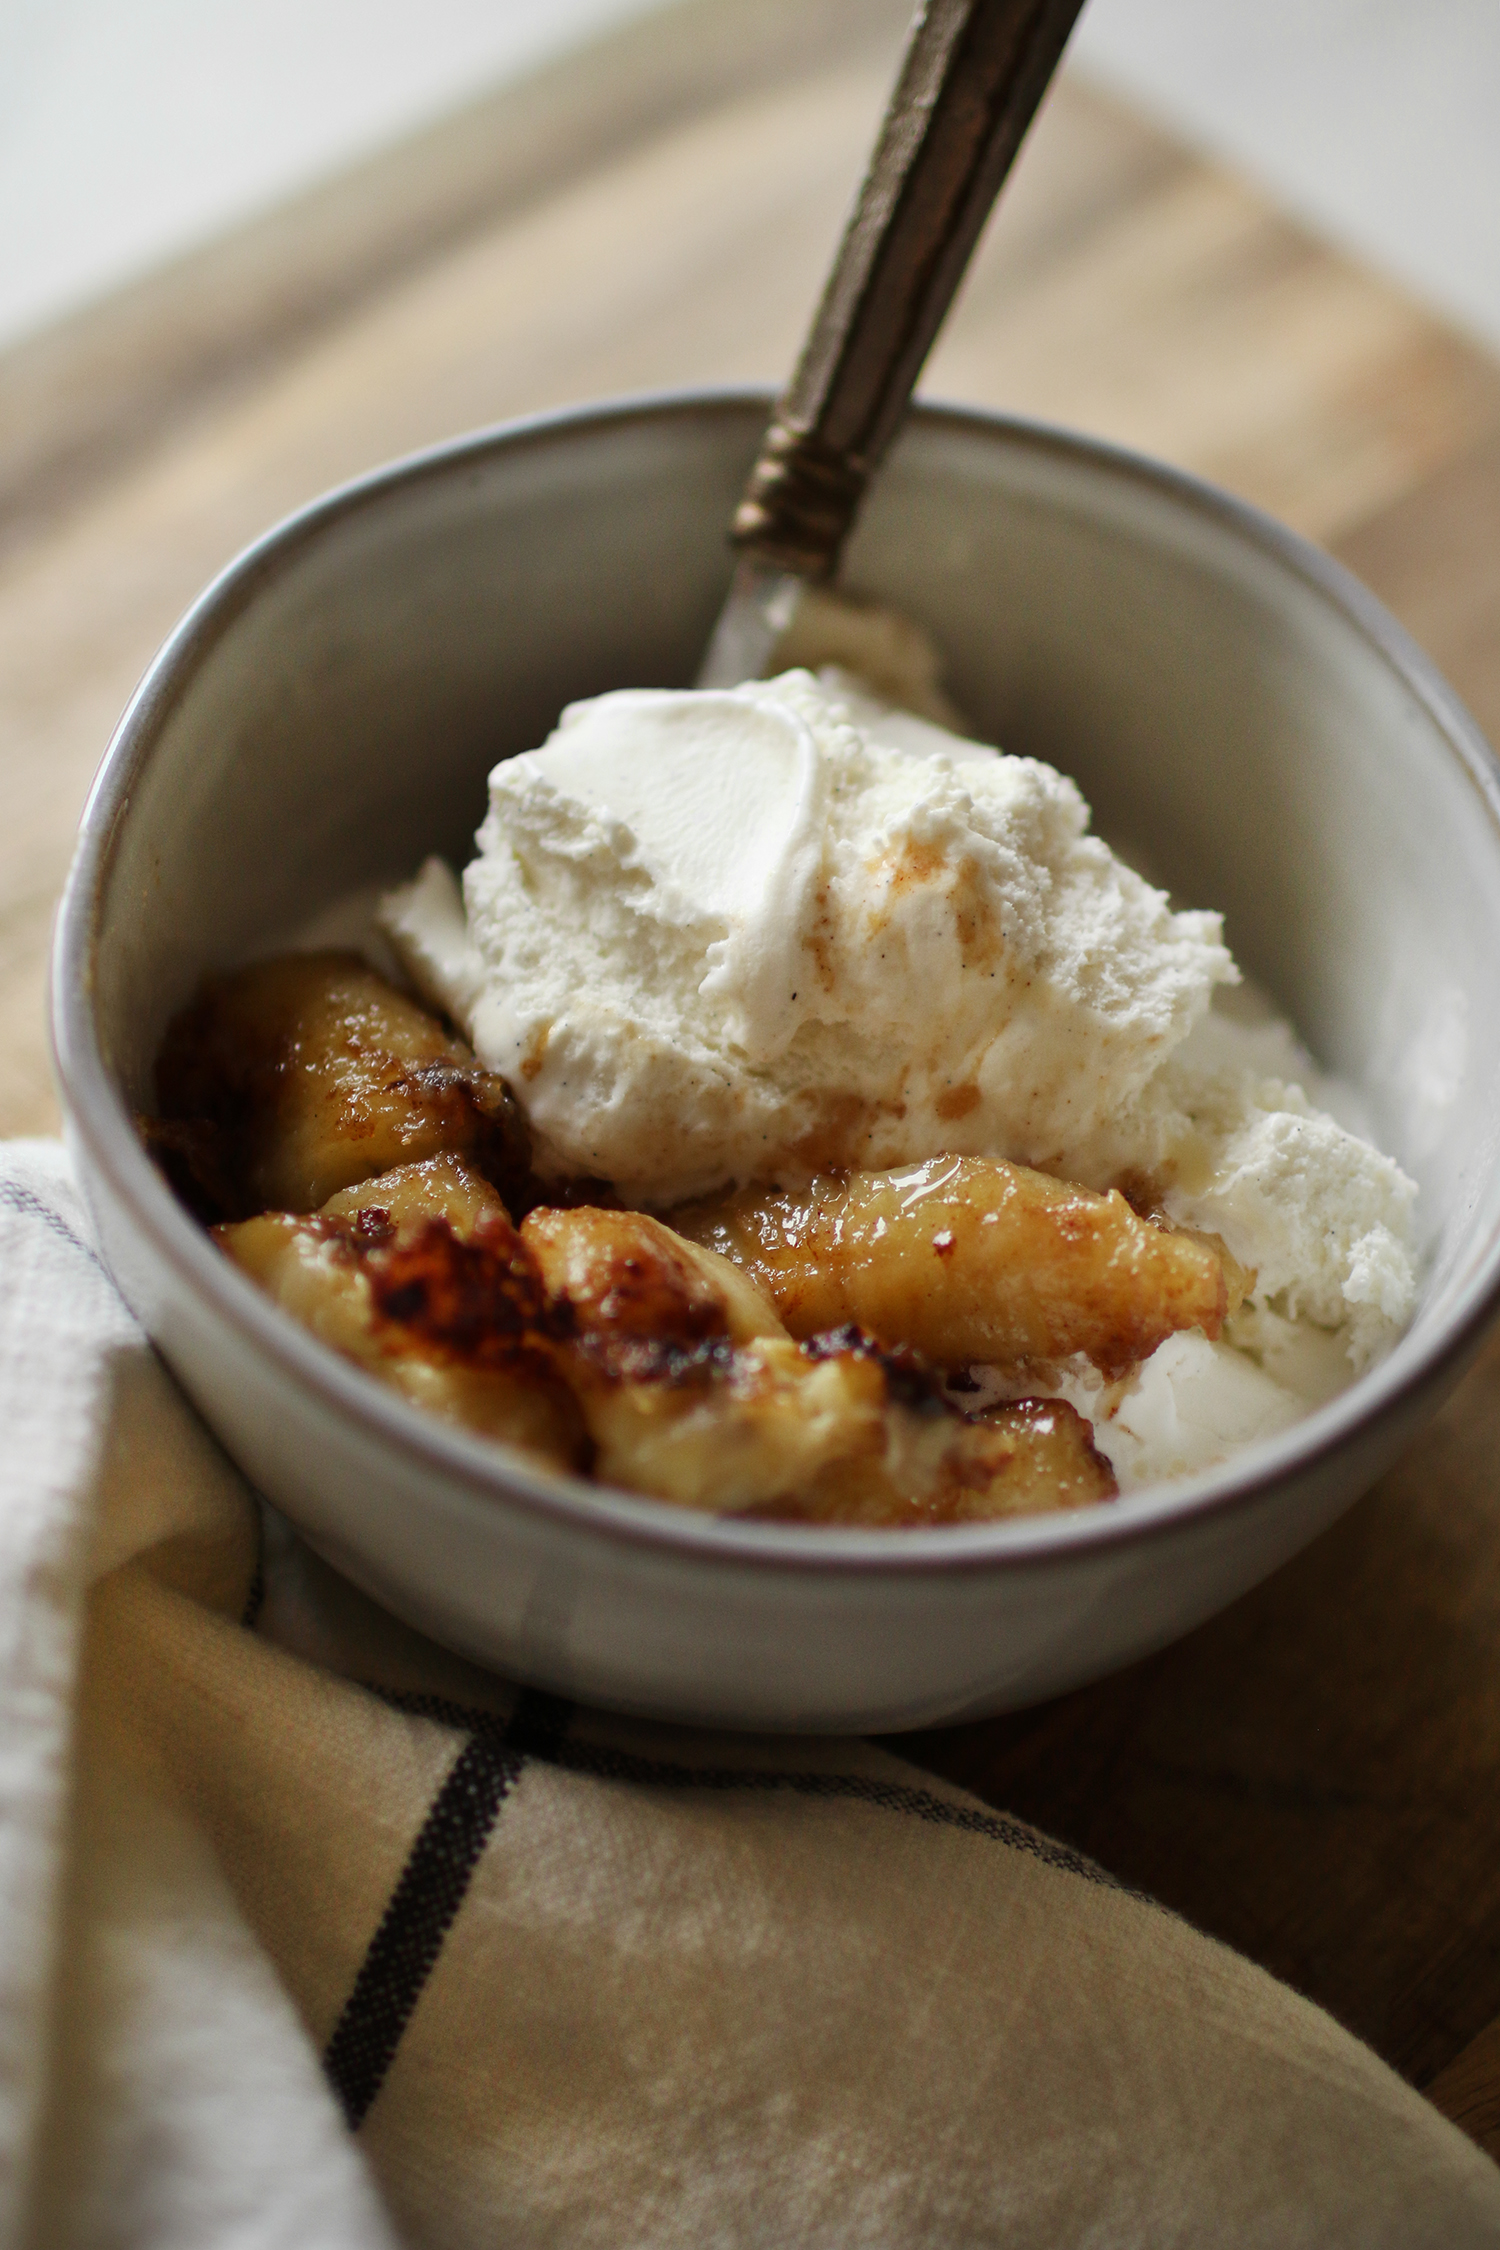 Our family loves fried bananas and ice cream for a delicious and easy summer dessert. The mix of brown sugar, butter, cinnamon, and hot banana pairs so well with cold vanilla bean ice cream. Catch the whole recipe on KaraLayne.com!